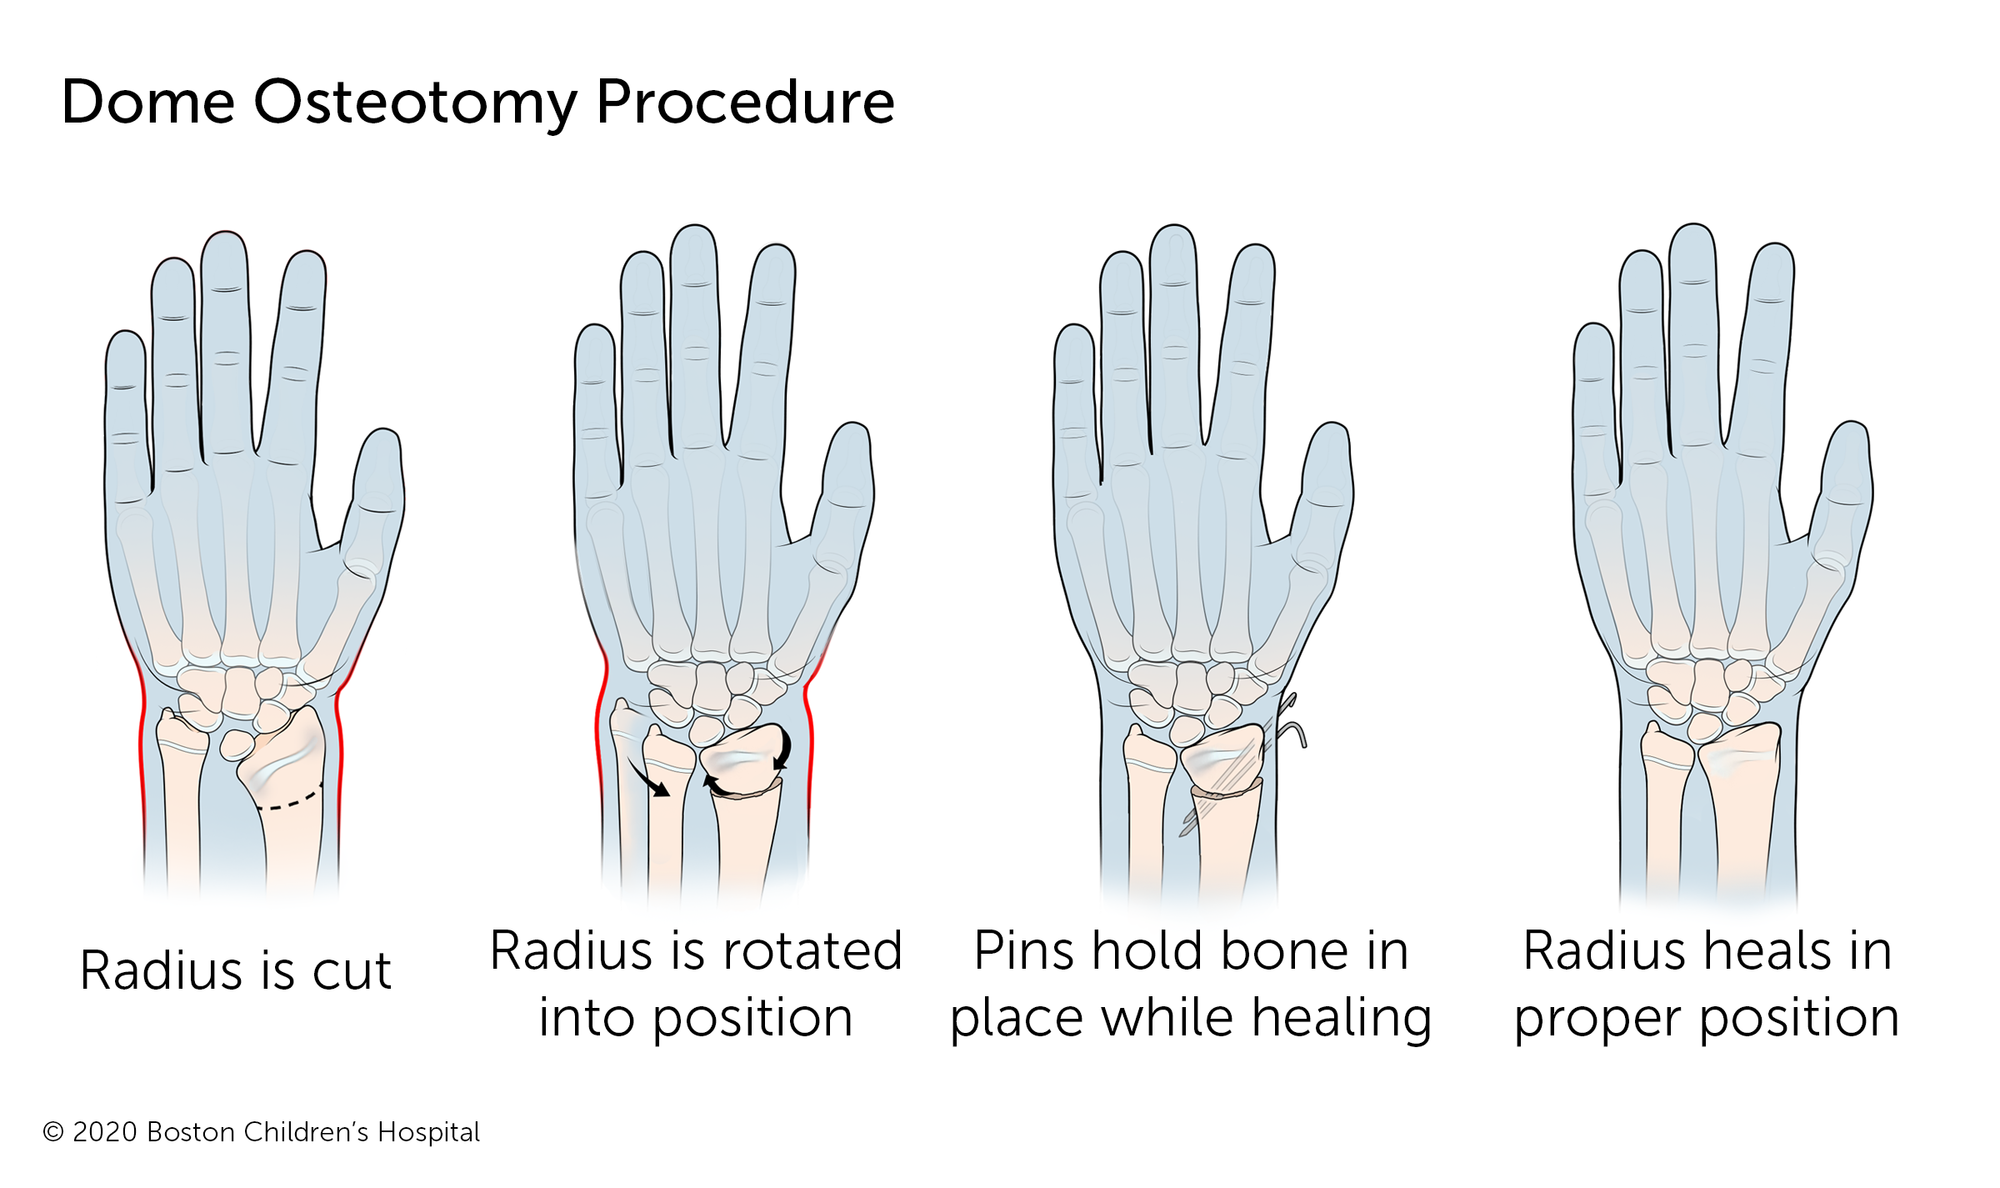 A dome osteotomy procedure corrects Madelung’s deformity by cutting the radius above where it connects to the wrist. The bone is then rotated and held in place with pins while it heals.